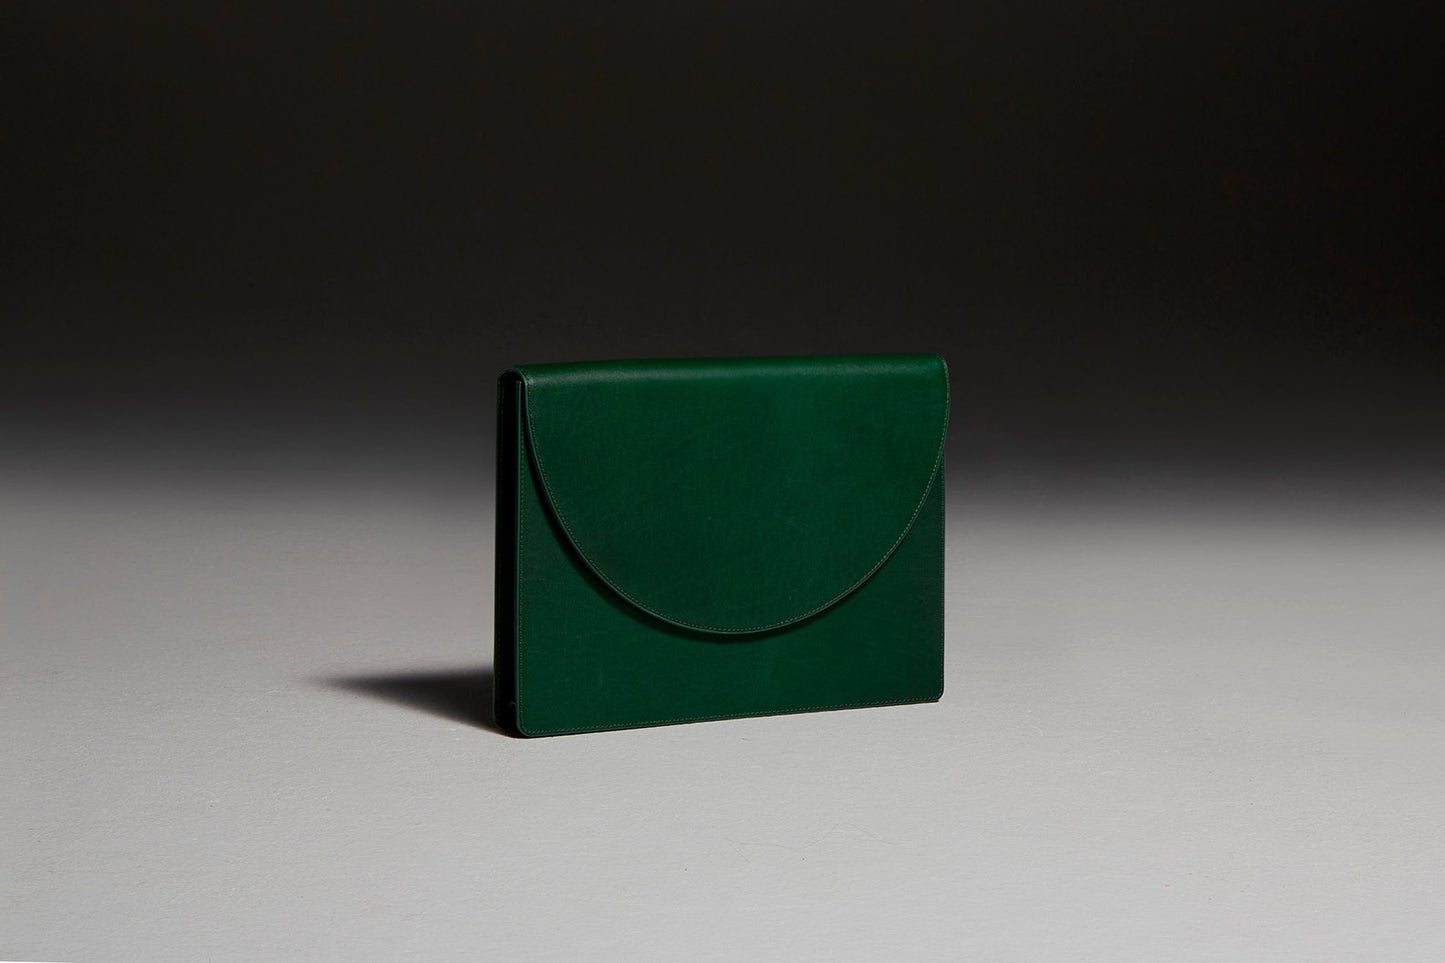 Green leather document folio sitting backwards in front of black backdrop